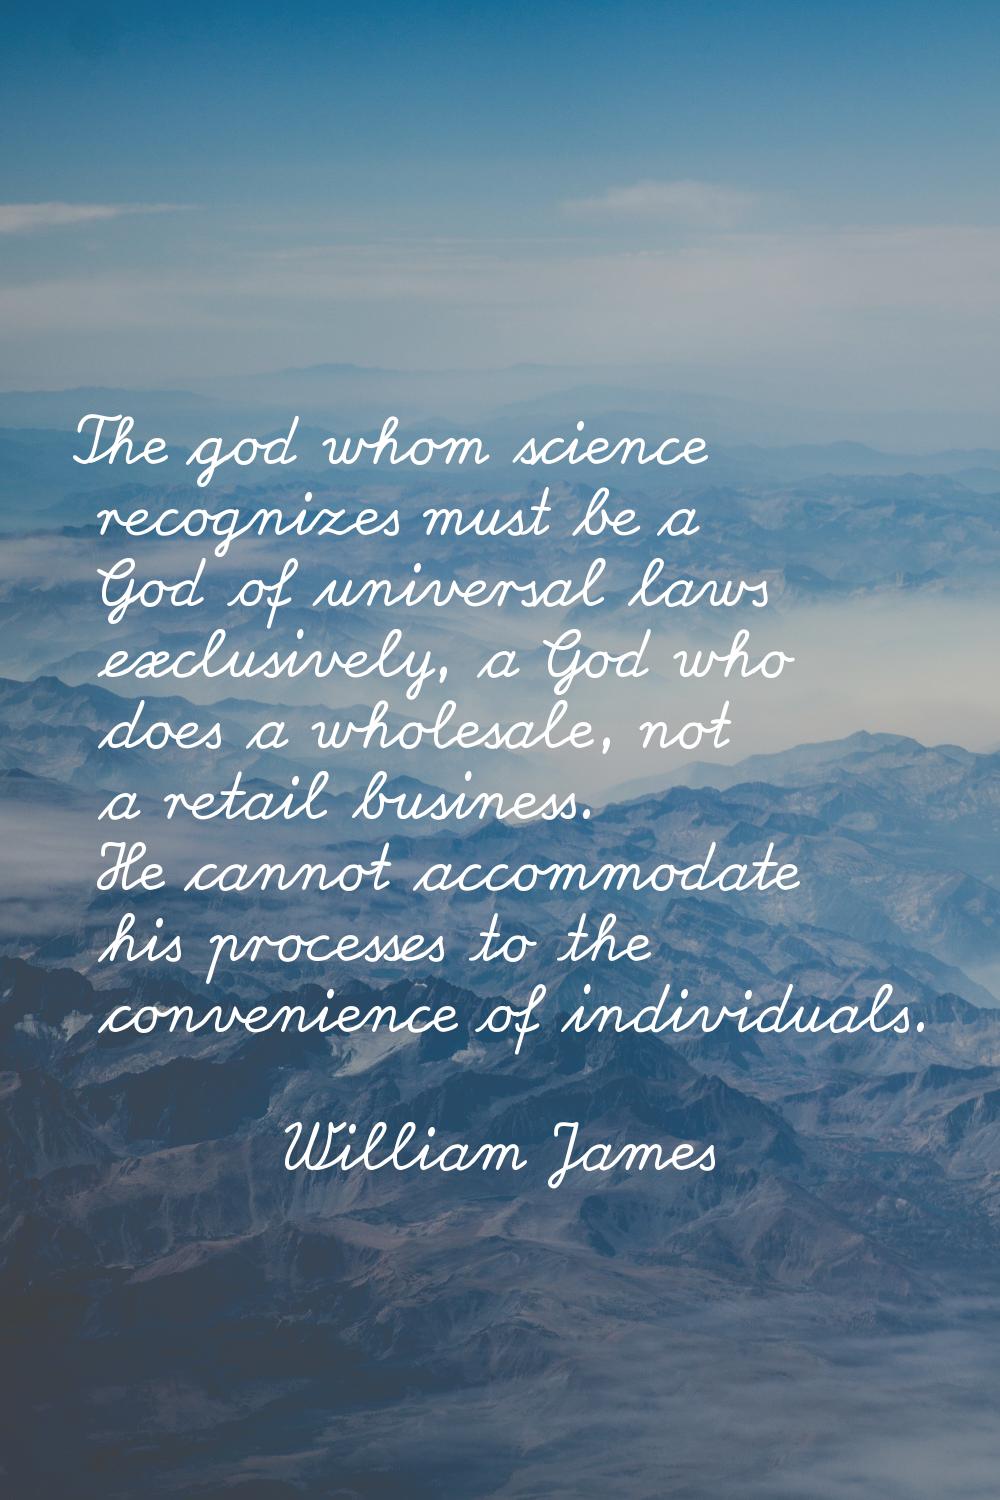 The god whom science recognizes must be a God of universal laws exclusively, a God who does a whole